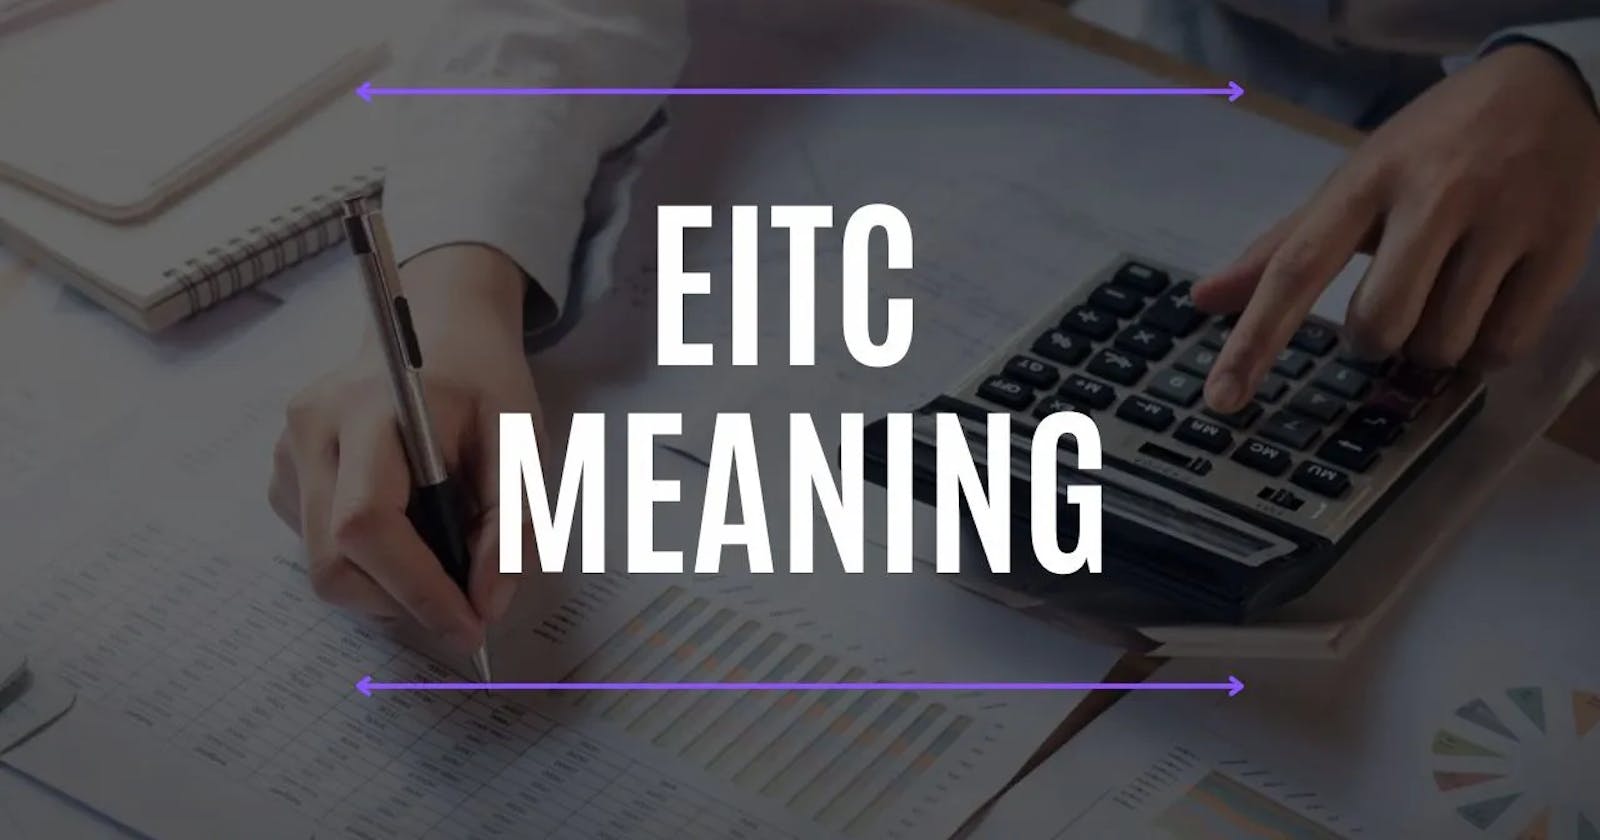 What EITC Stands For